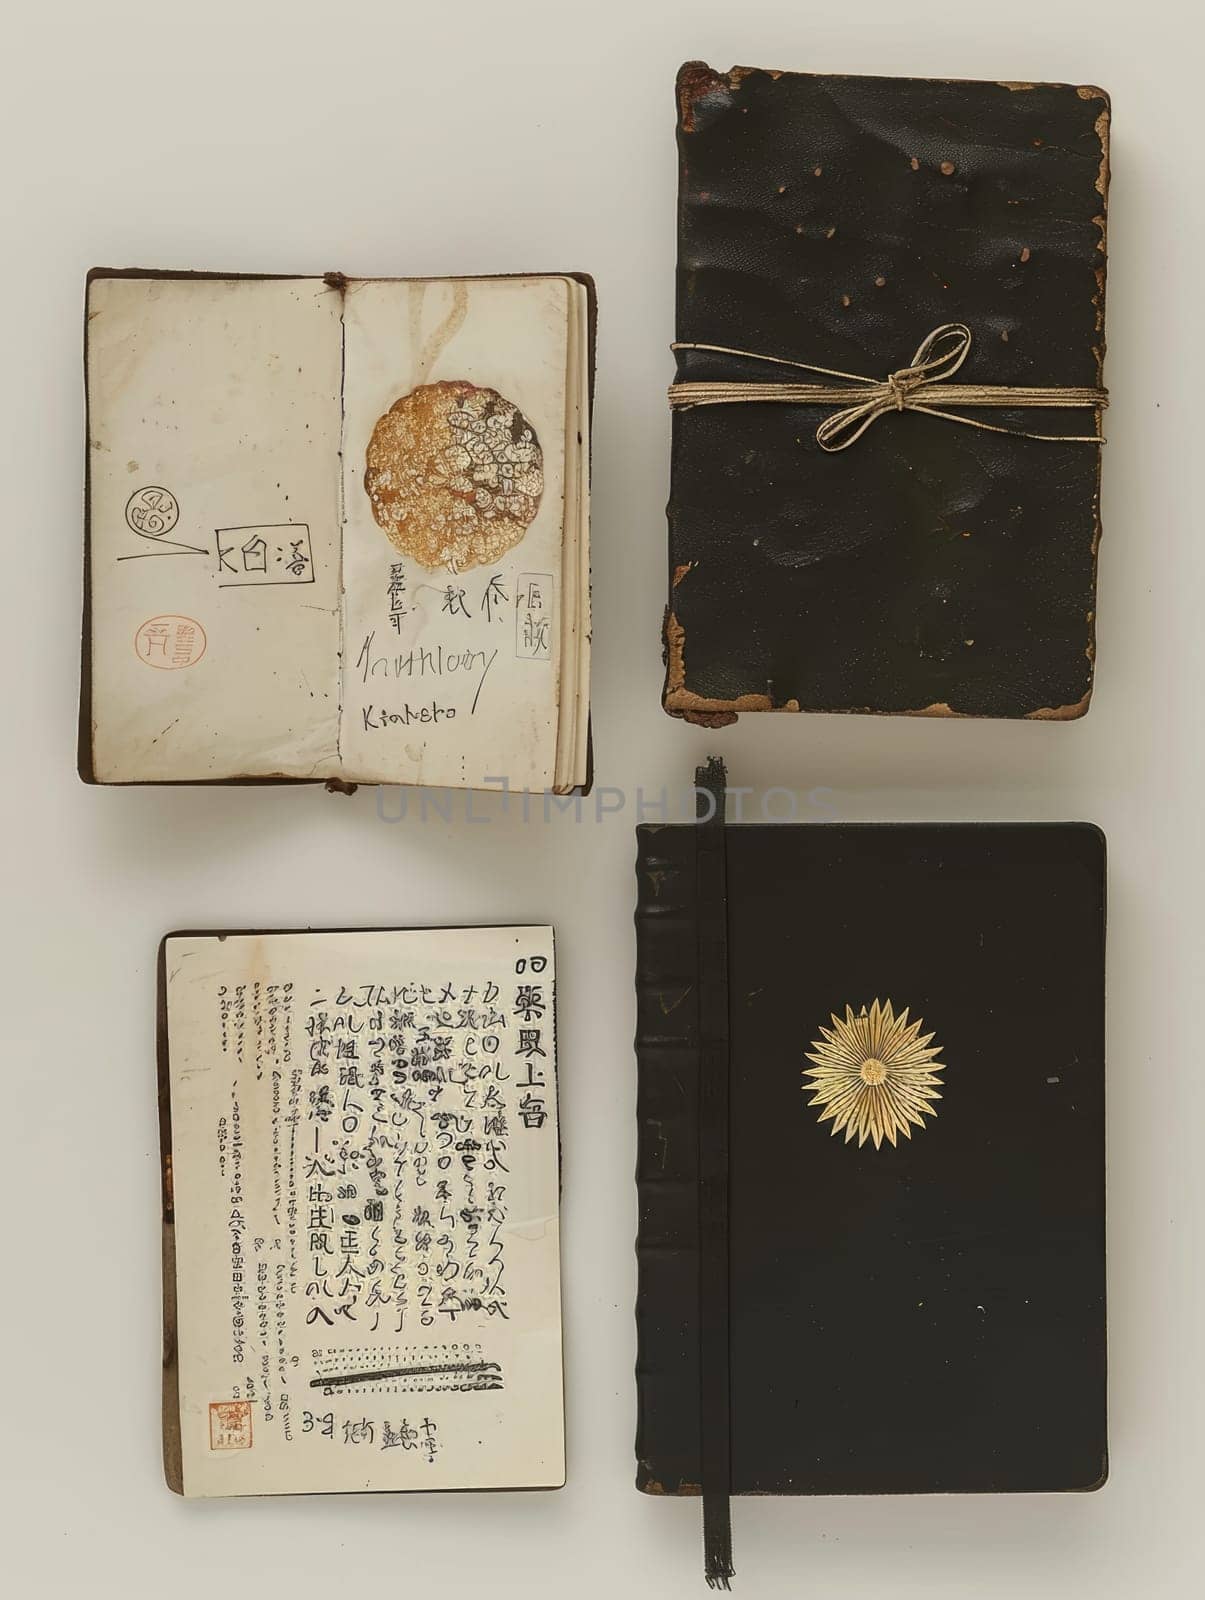 Traditional Japanese bound texts paired with an ornate golden seal, presenting a connection to Japans rich literary and historical past